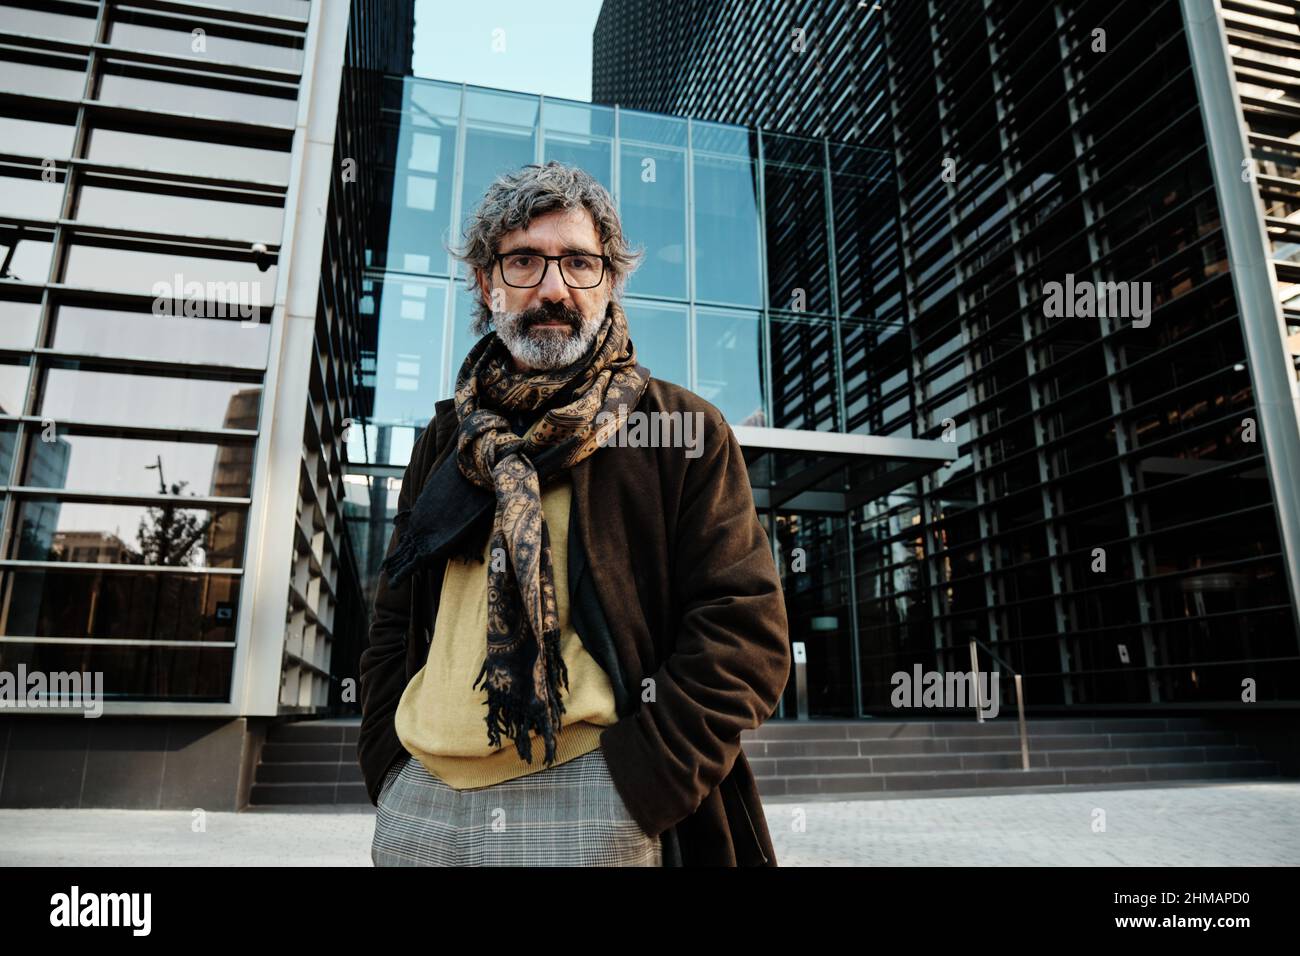 Middle-aged man looking at the camera while posing in the financial district with an office building on background. Stock Photo